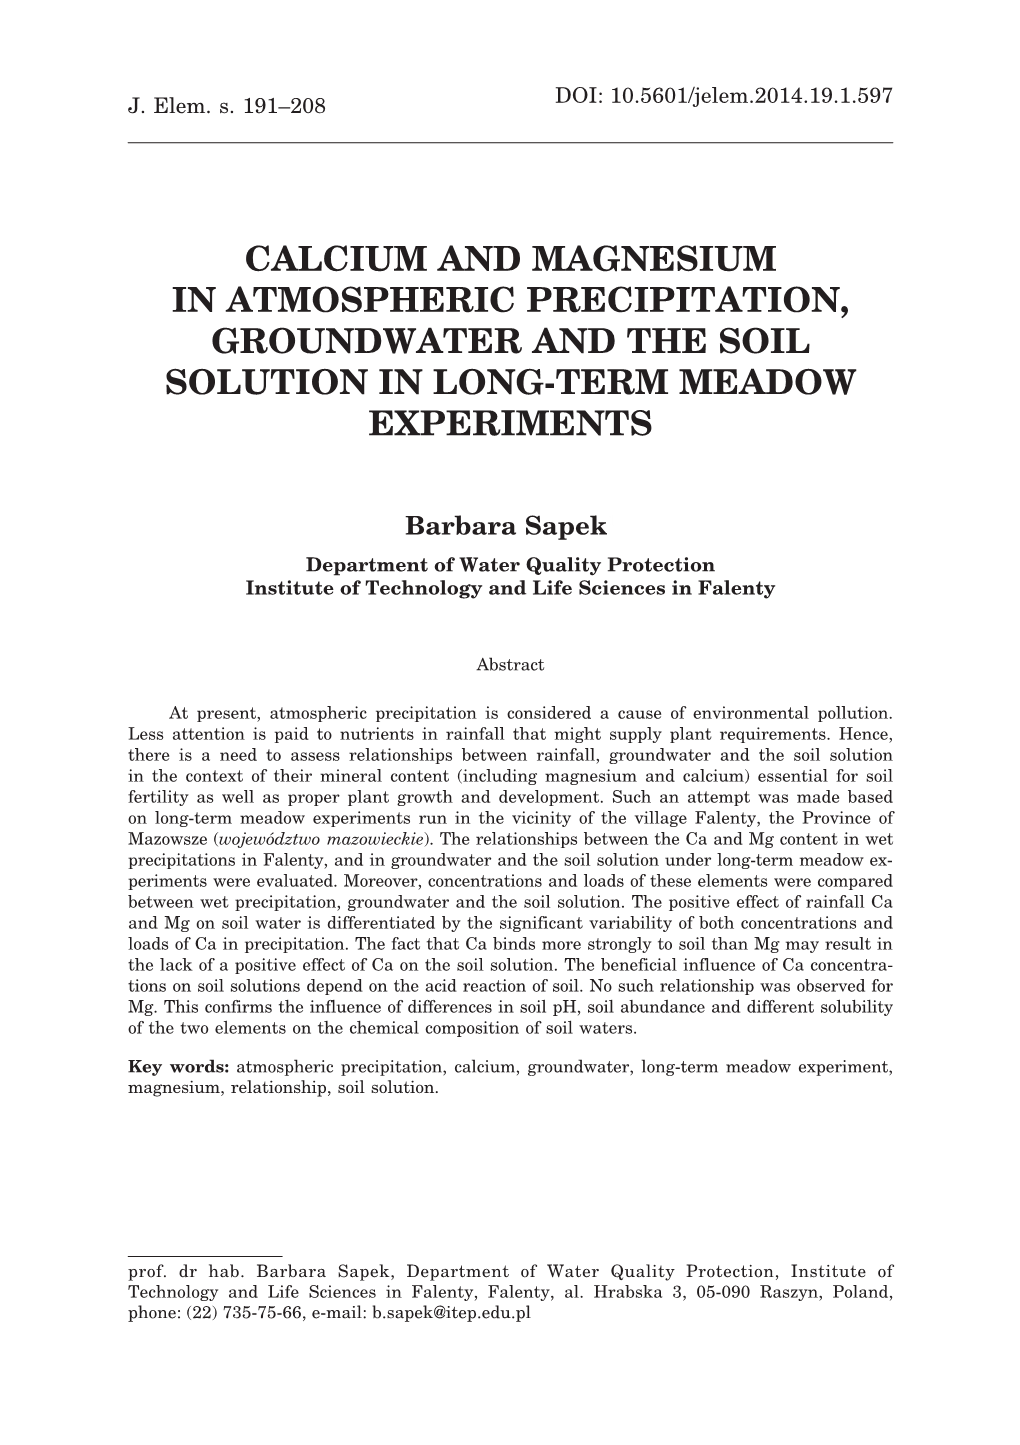 Calcium and Magnesium in Atmospheric Precipitation, Groundwater and the Soil Solution in Long-Term Meadow Experiments